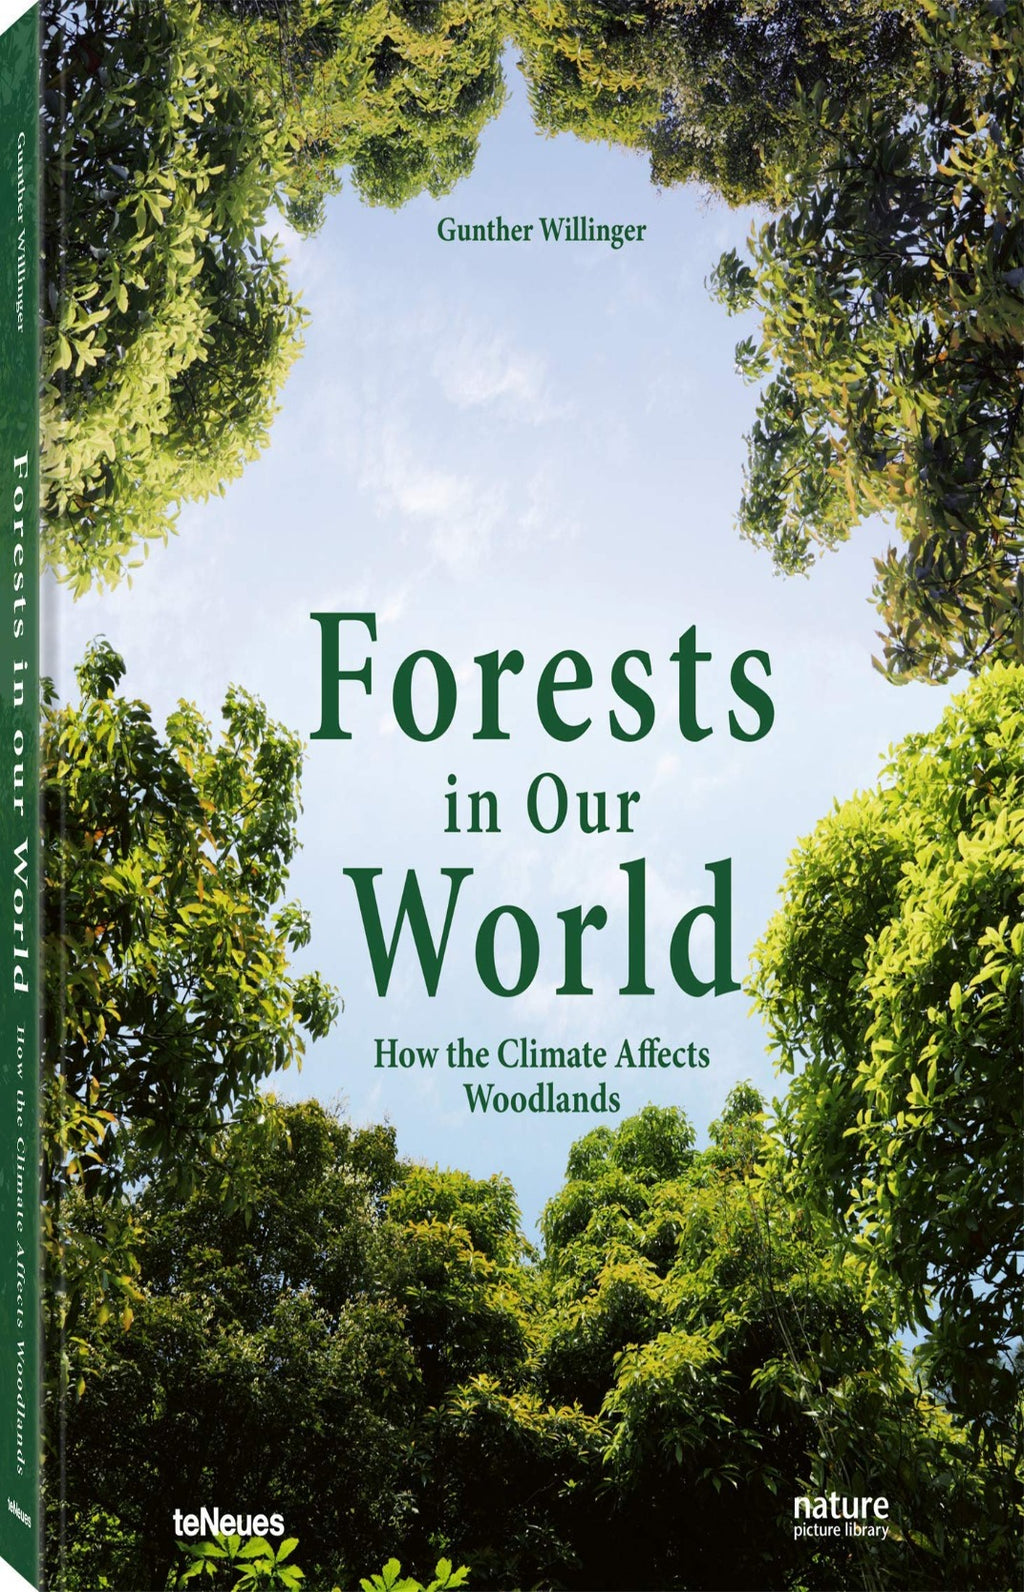 Forests in Our World: How the Climate Affects Woodlands